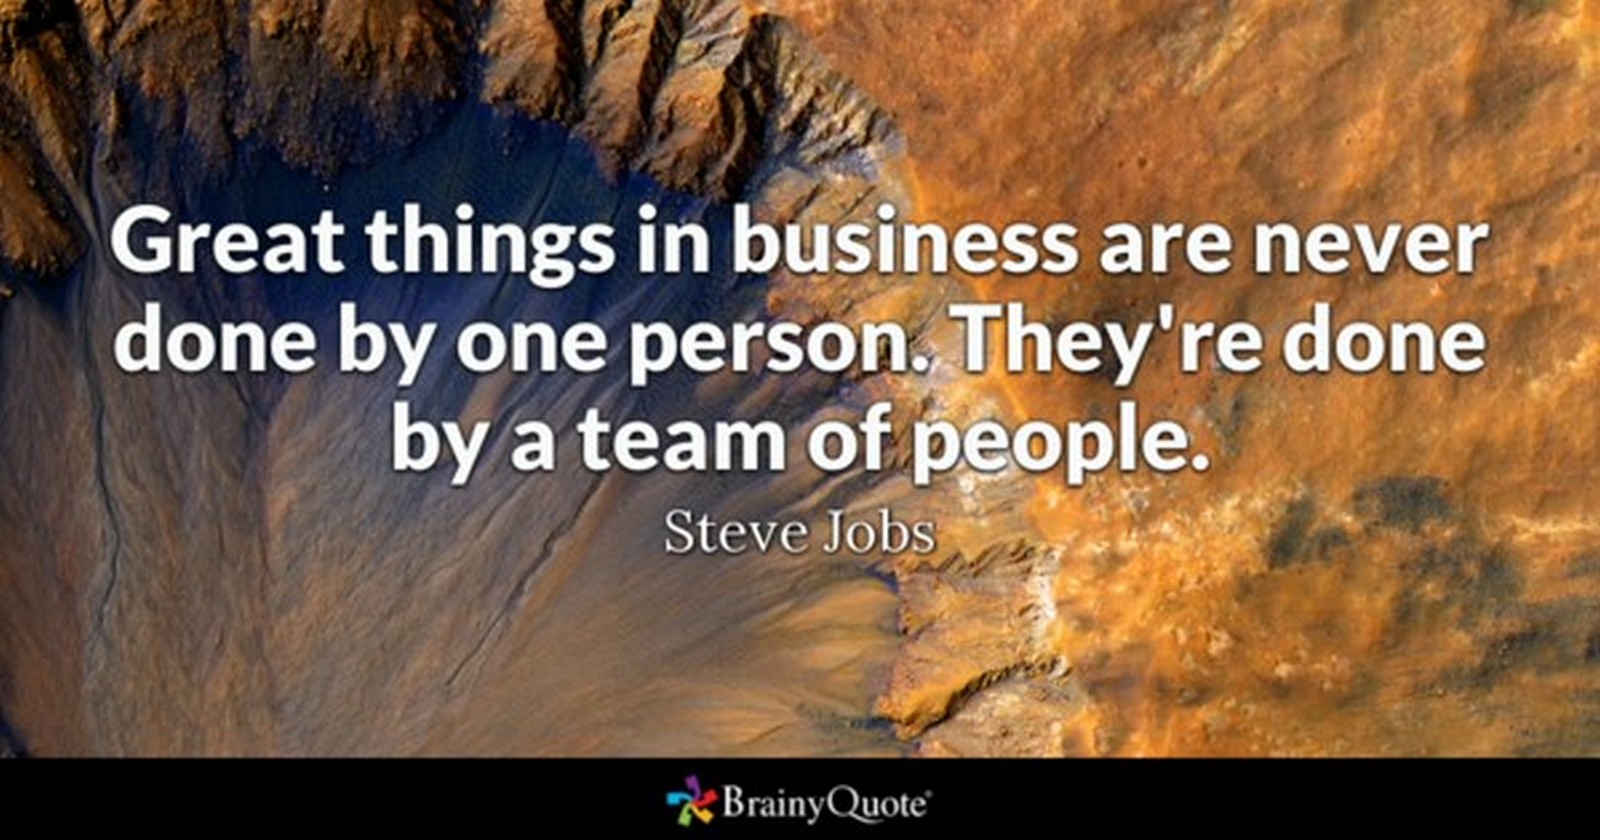 19 Best Steve Jobs Quotes - "Great things in business are never done by one person. They're done by a team of people."